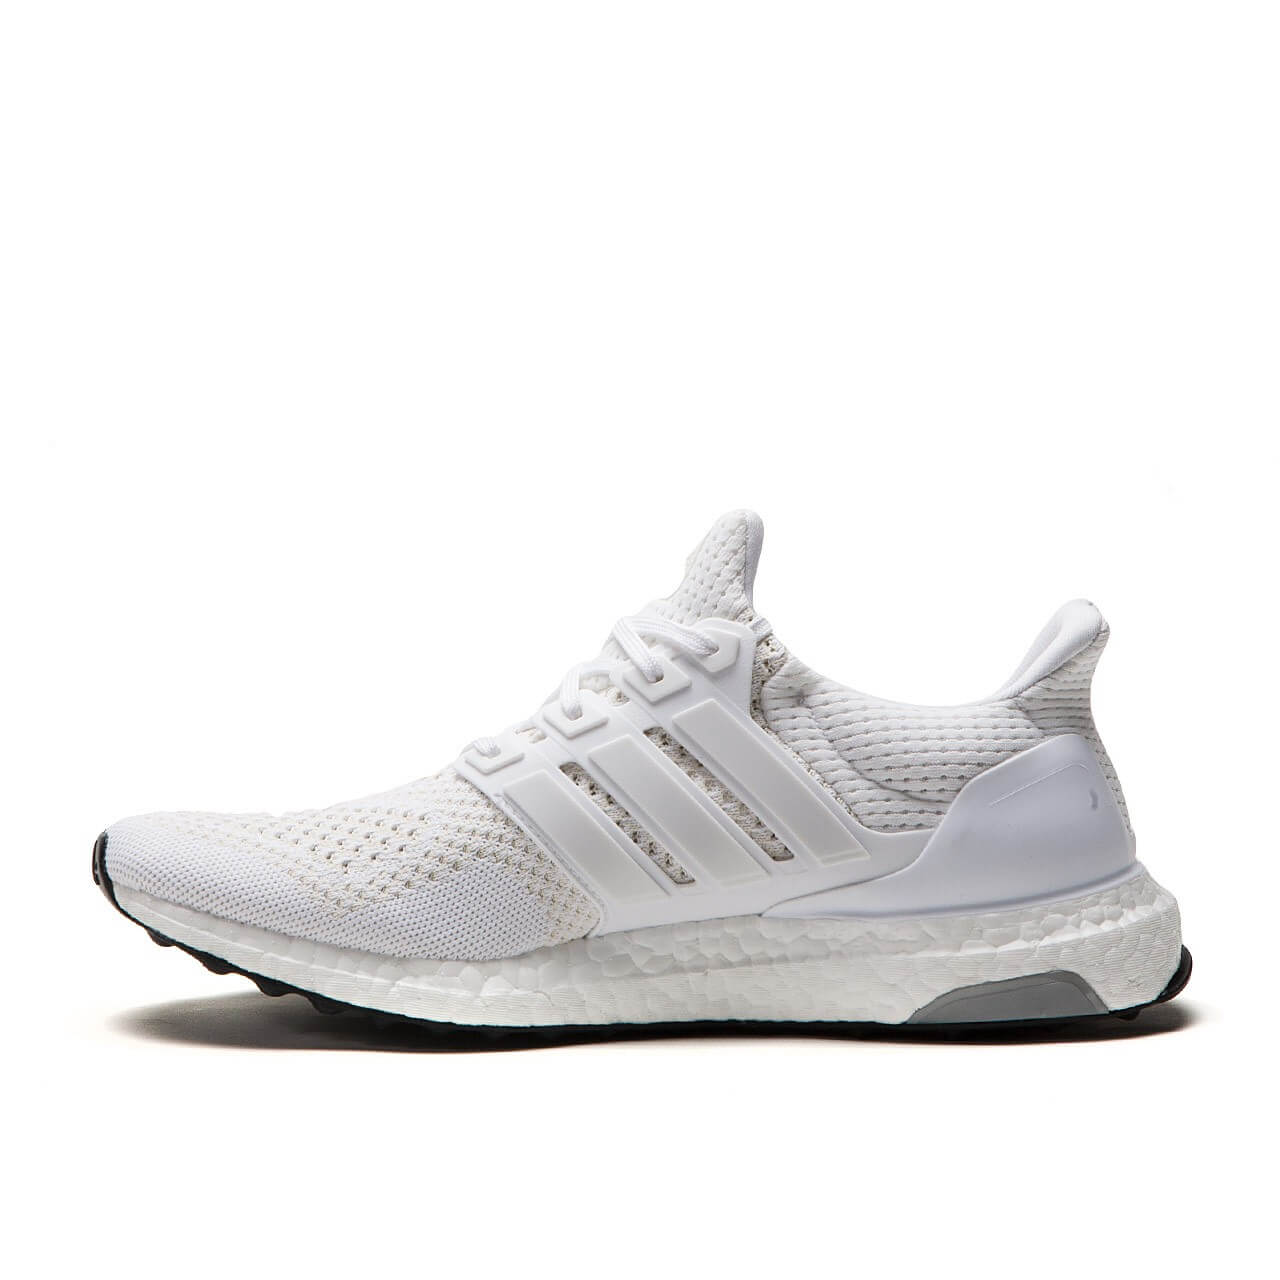 adidas Ultra Boost Triple White - Where To Buy - S77416 | The Sole Supplier